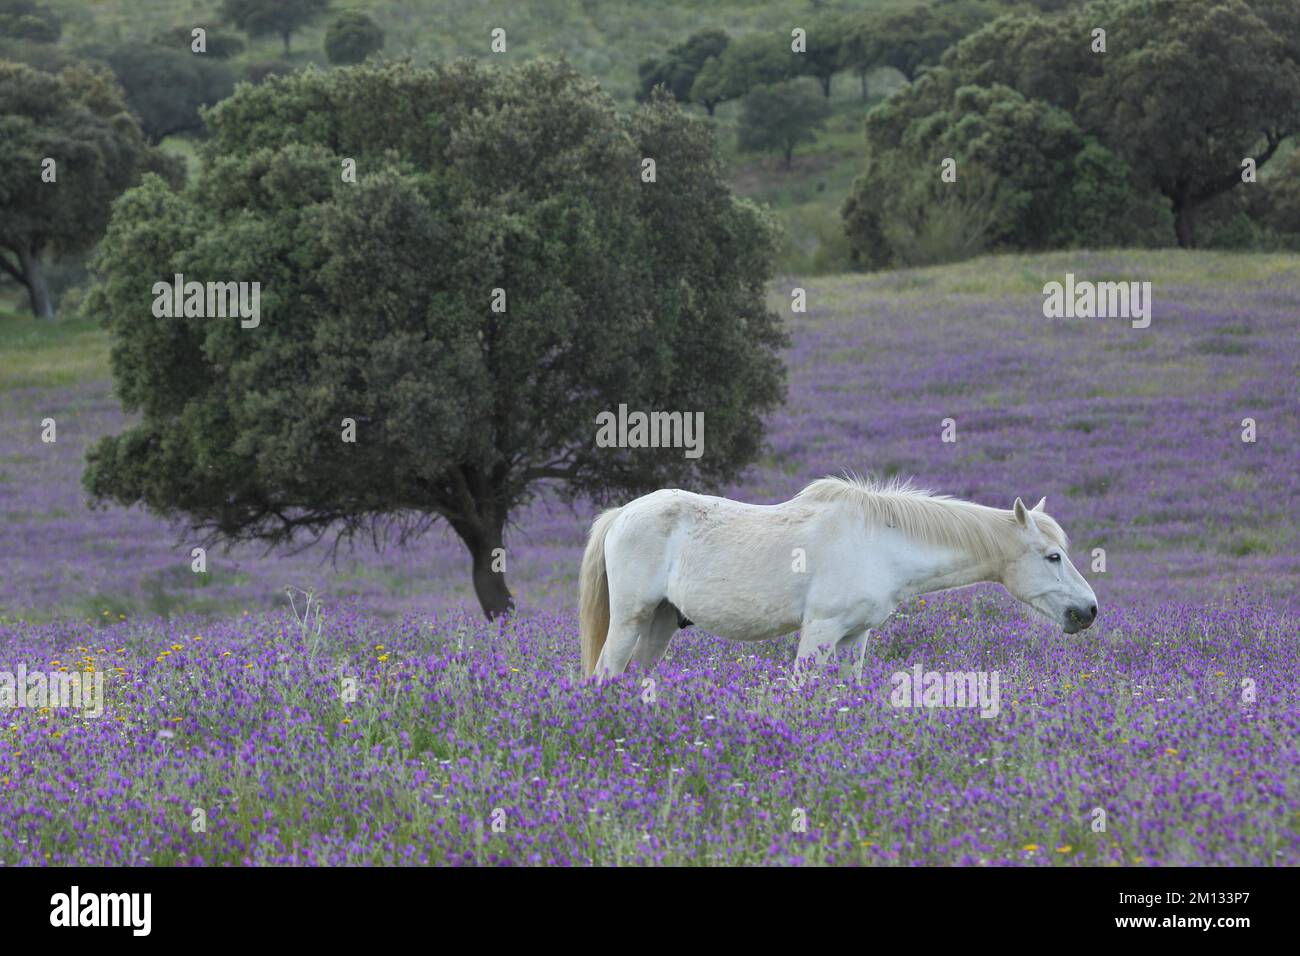 Landscape with holm oak and purple flower meadow and white horse, tree, Campillo de Deleitosa, Extremadura, Spain, Europe Stock Photo